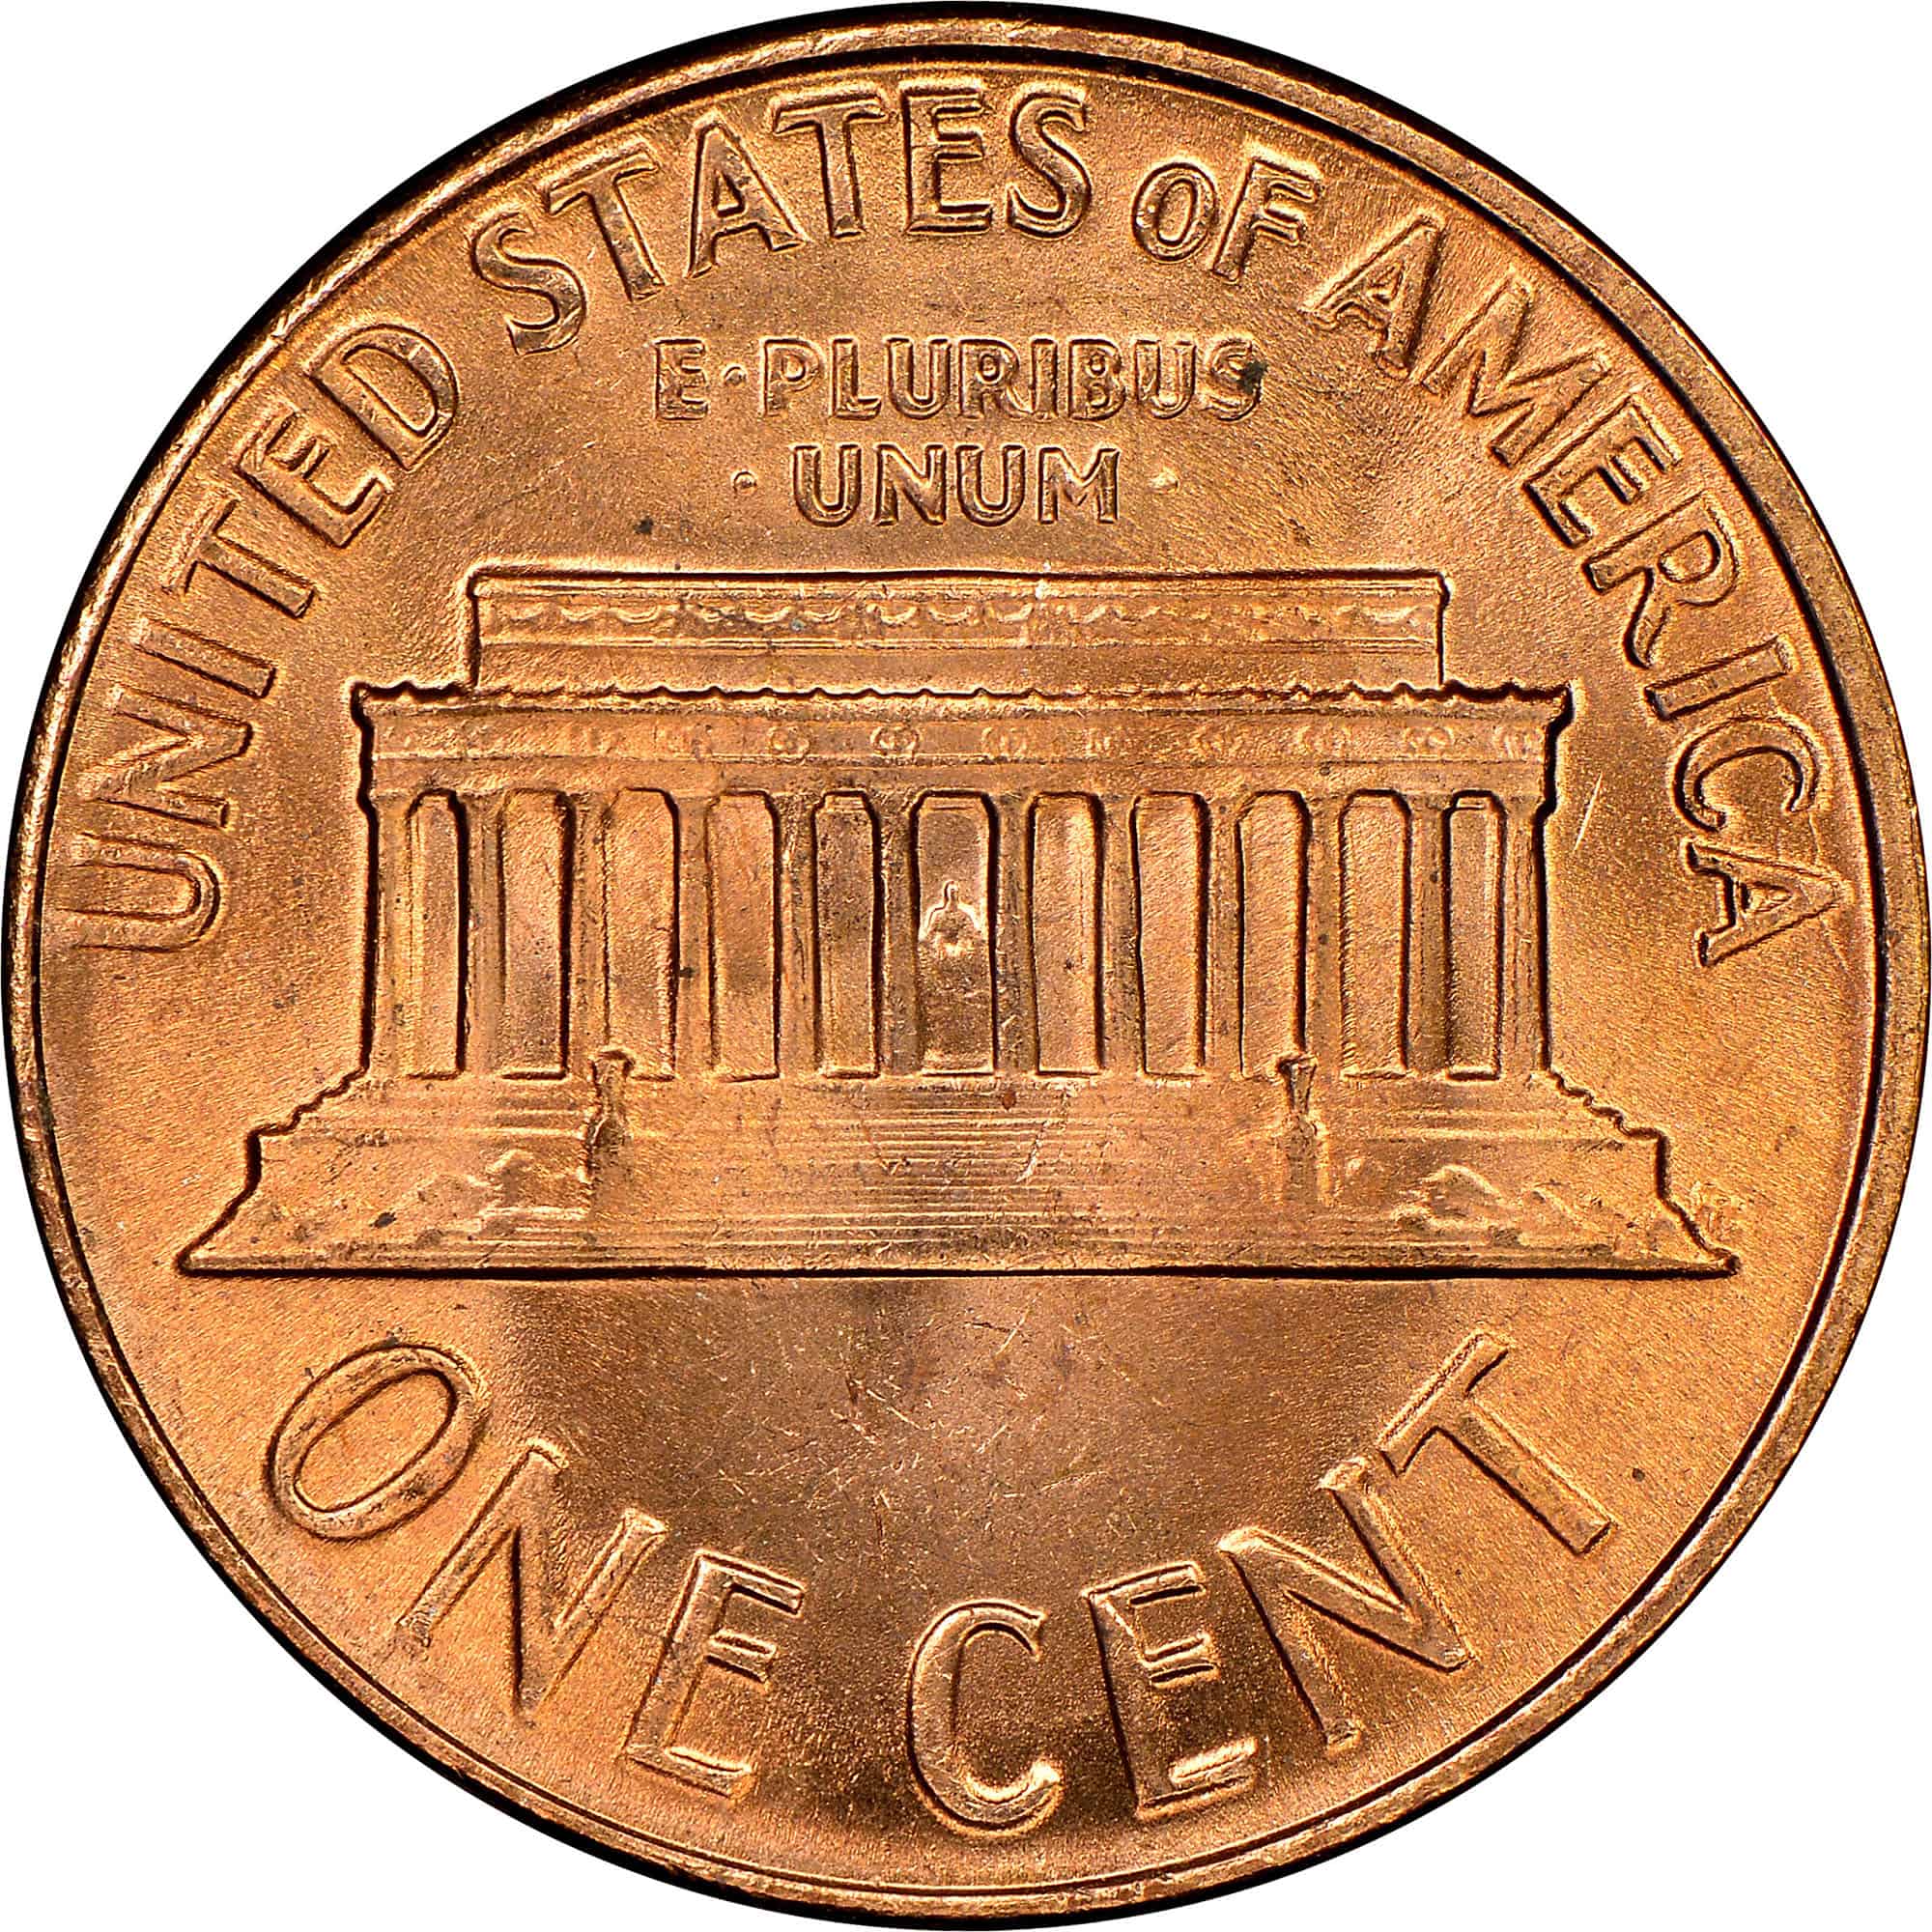 The Reverse of the 1963 Penny